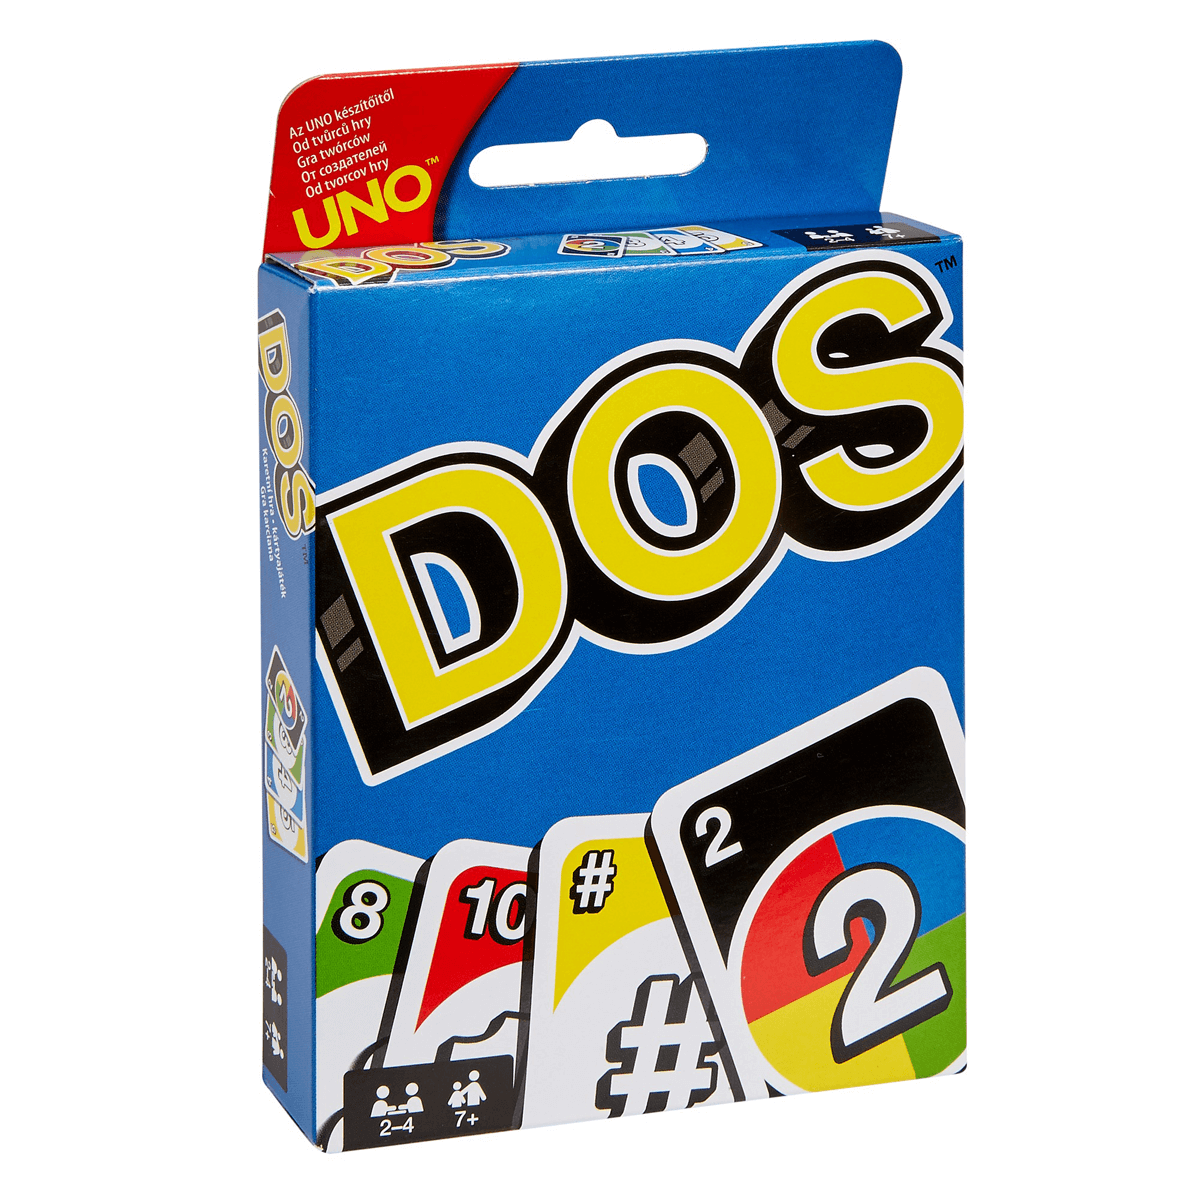 DOS, a rather confusing card game